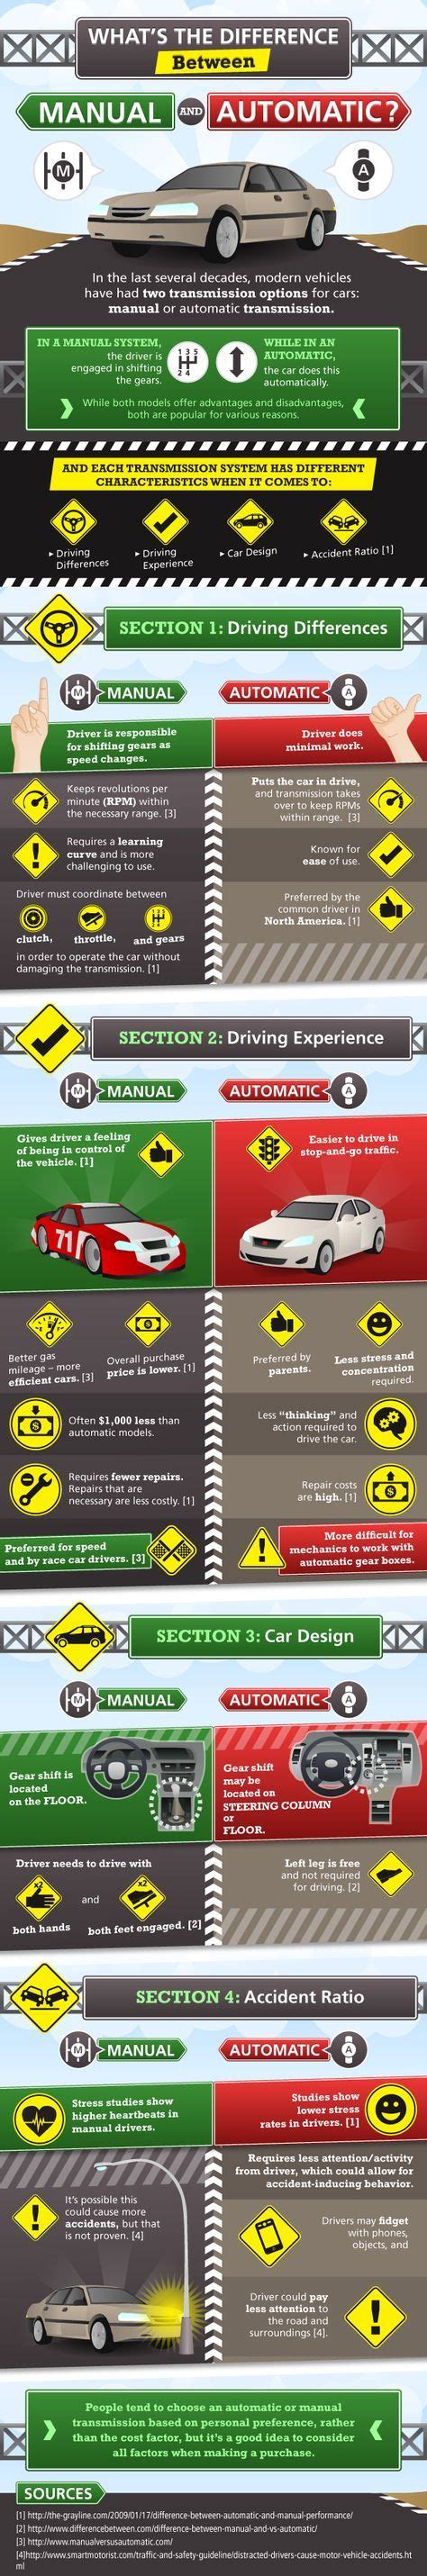 Manual Vs Automatic The Differences Between Manual Vs Automatic